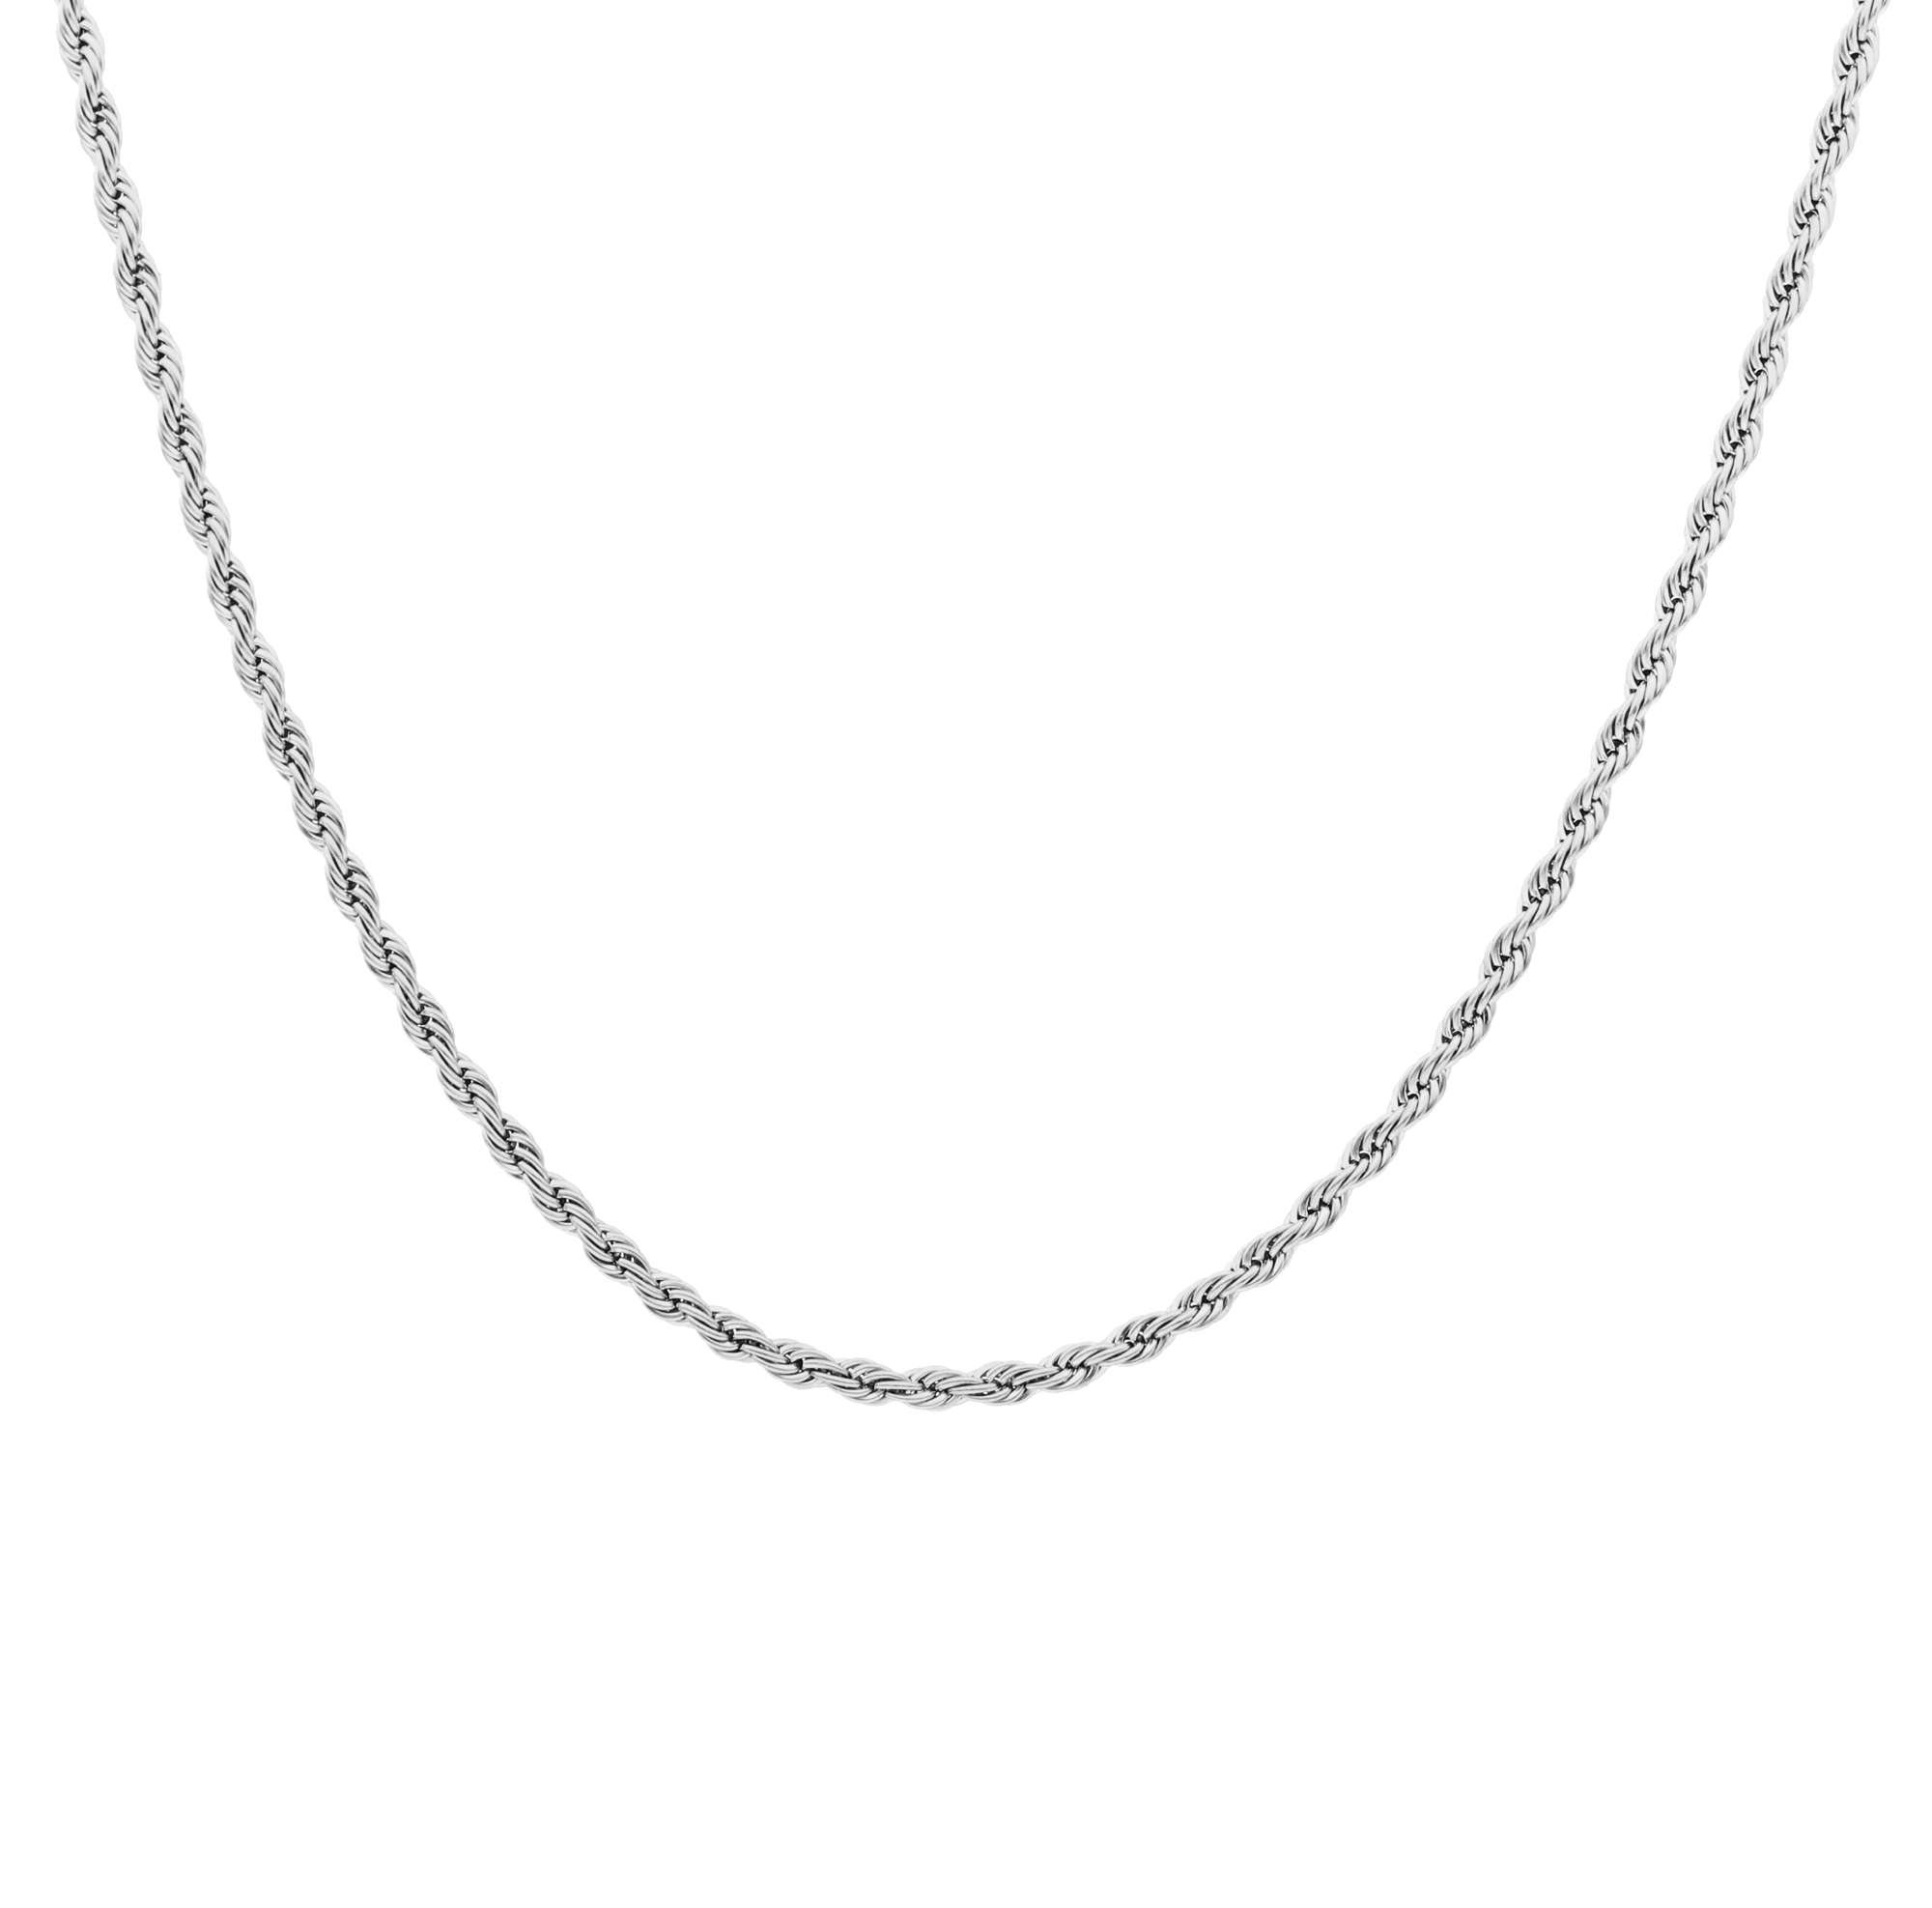 FJ Watches baby don necklace French rope twisted chain silver men 2.5mm